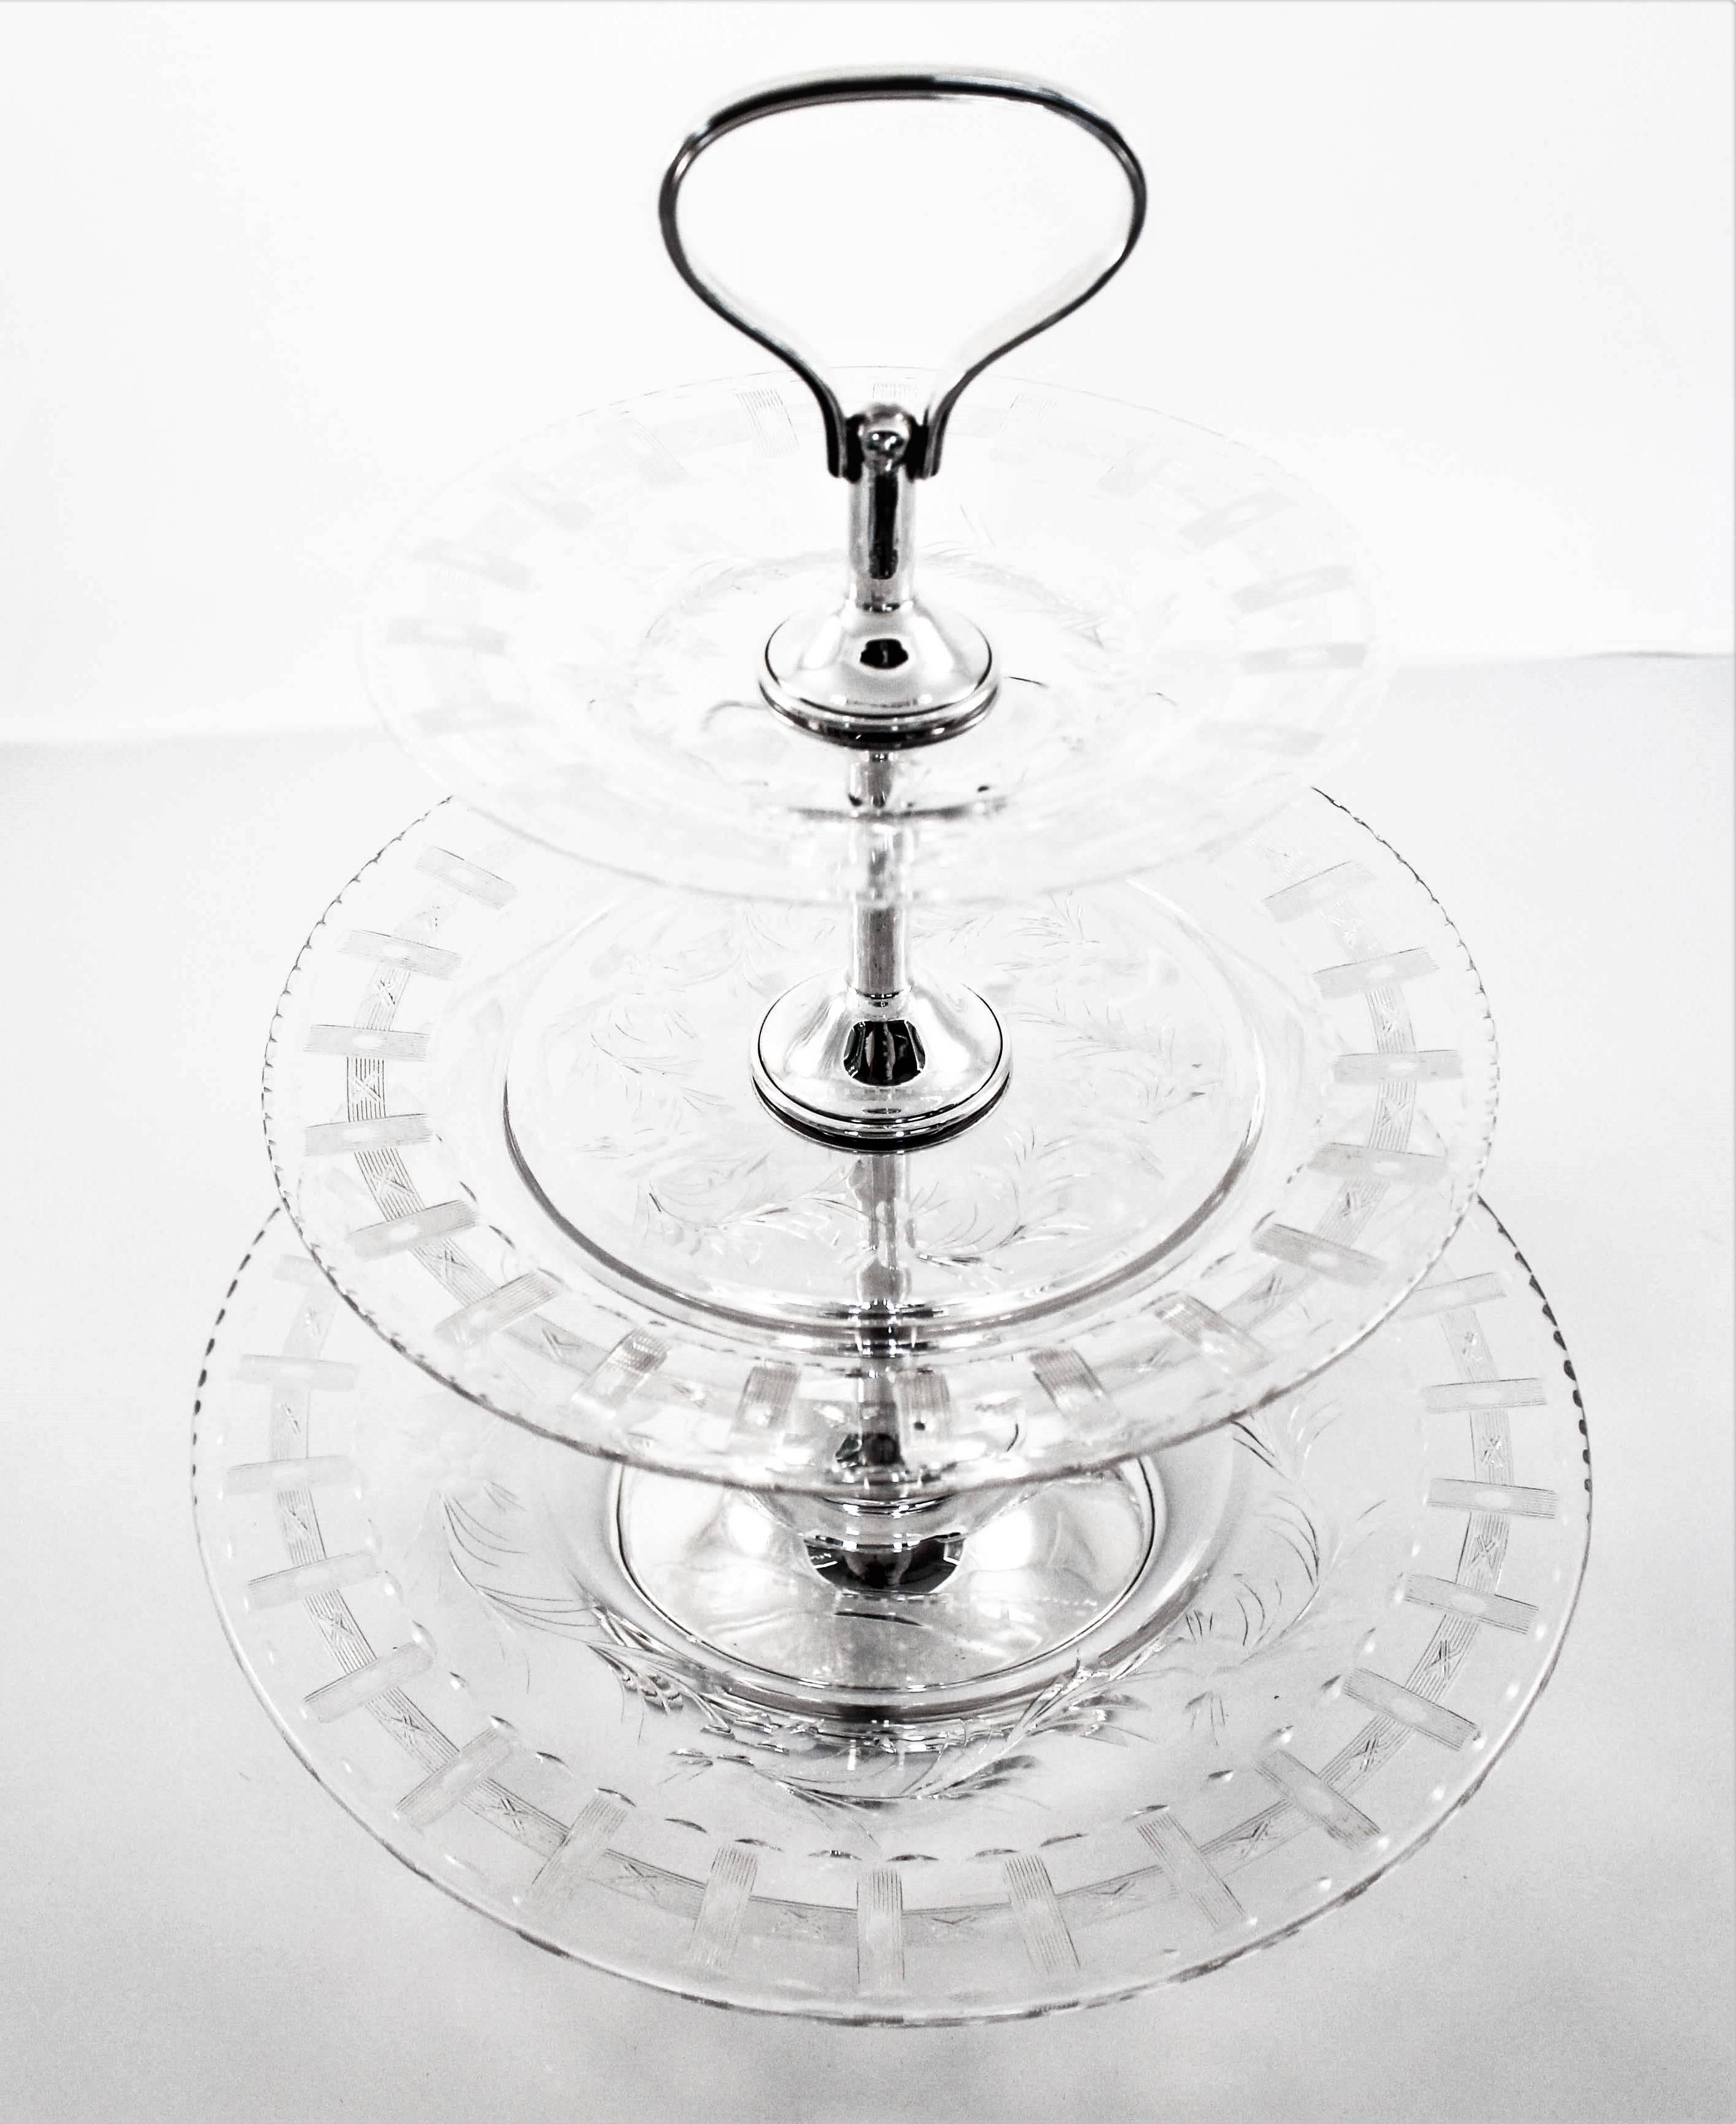 A spectacular example of Hawkes crystal and sterling hollowware. This three-tier piece is the perfect accessory for entertaining. Whether filled with hors d’oeuvres or desserts this treasure will be the center of attraction. The three crystal dishes